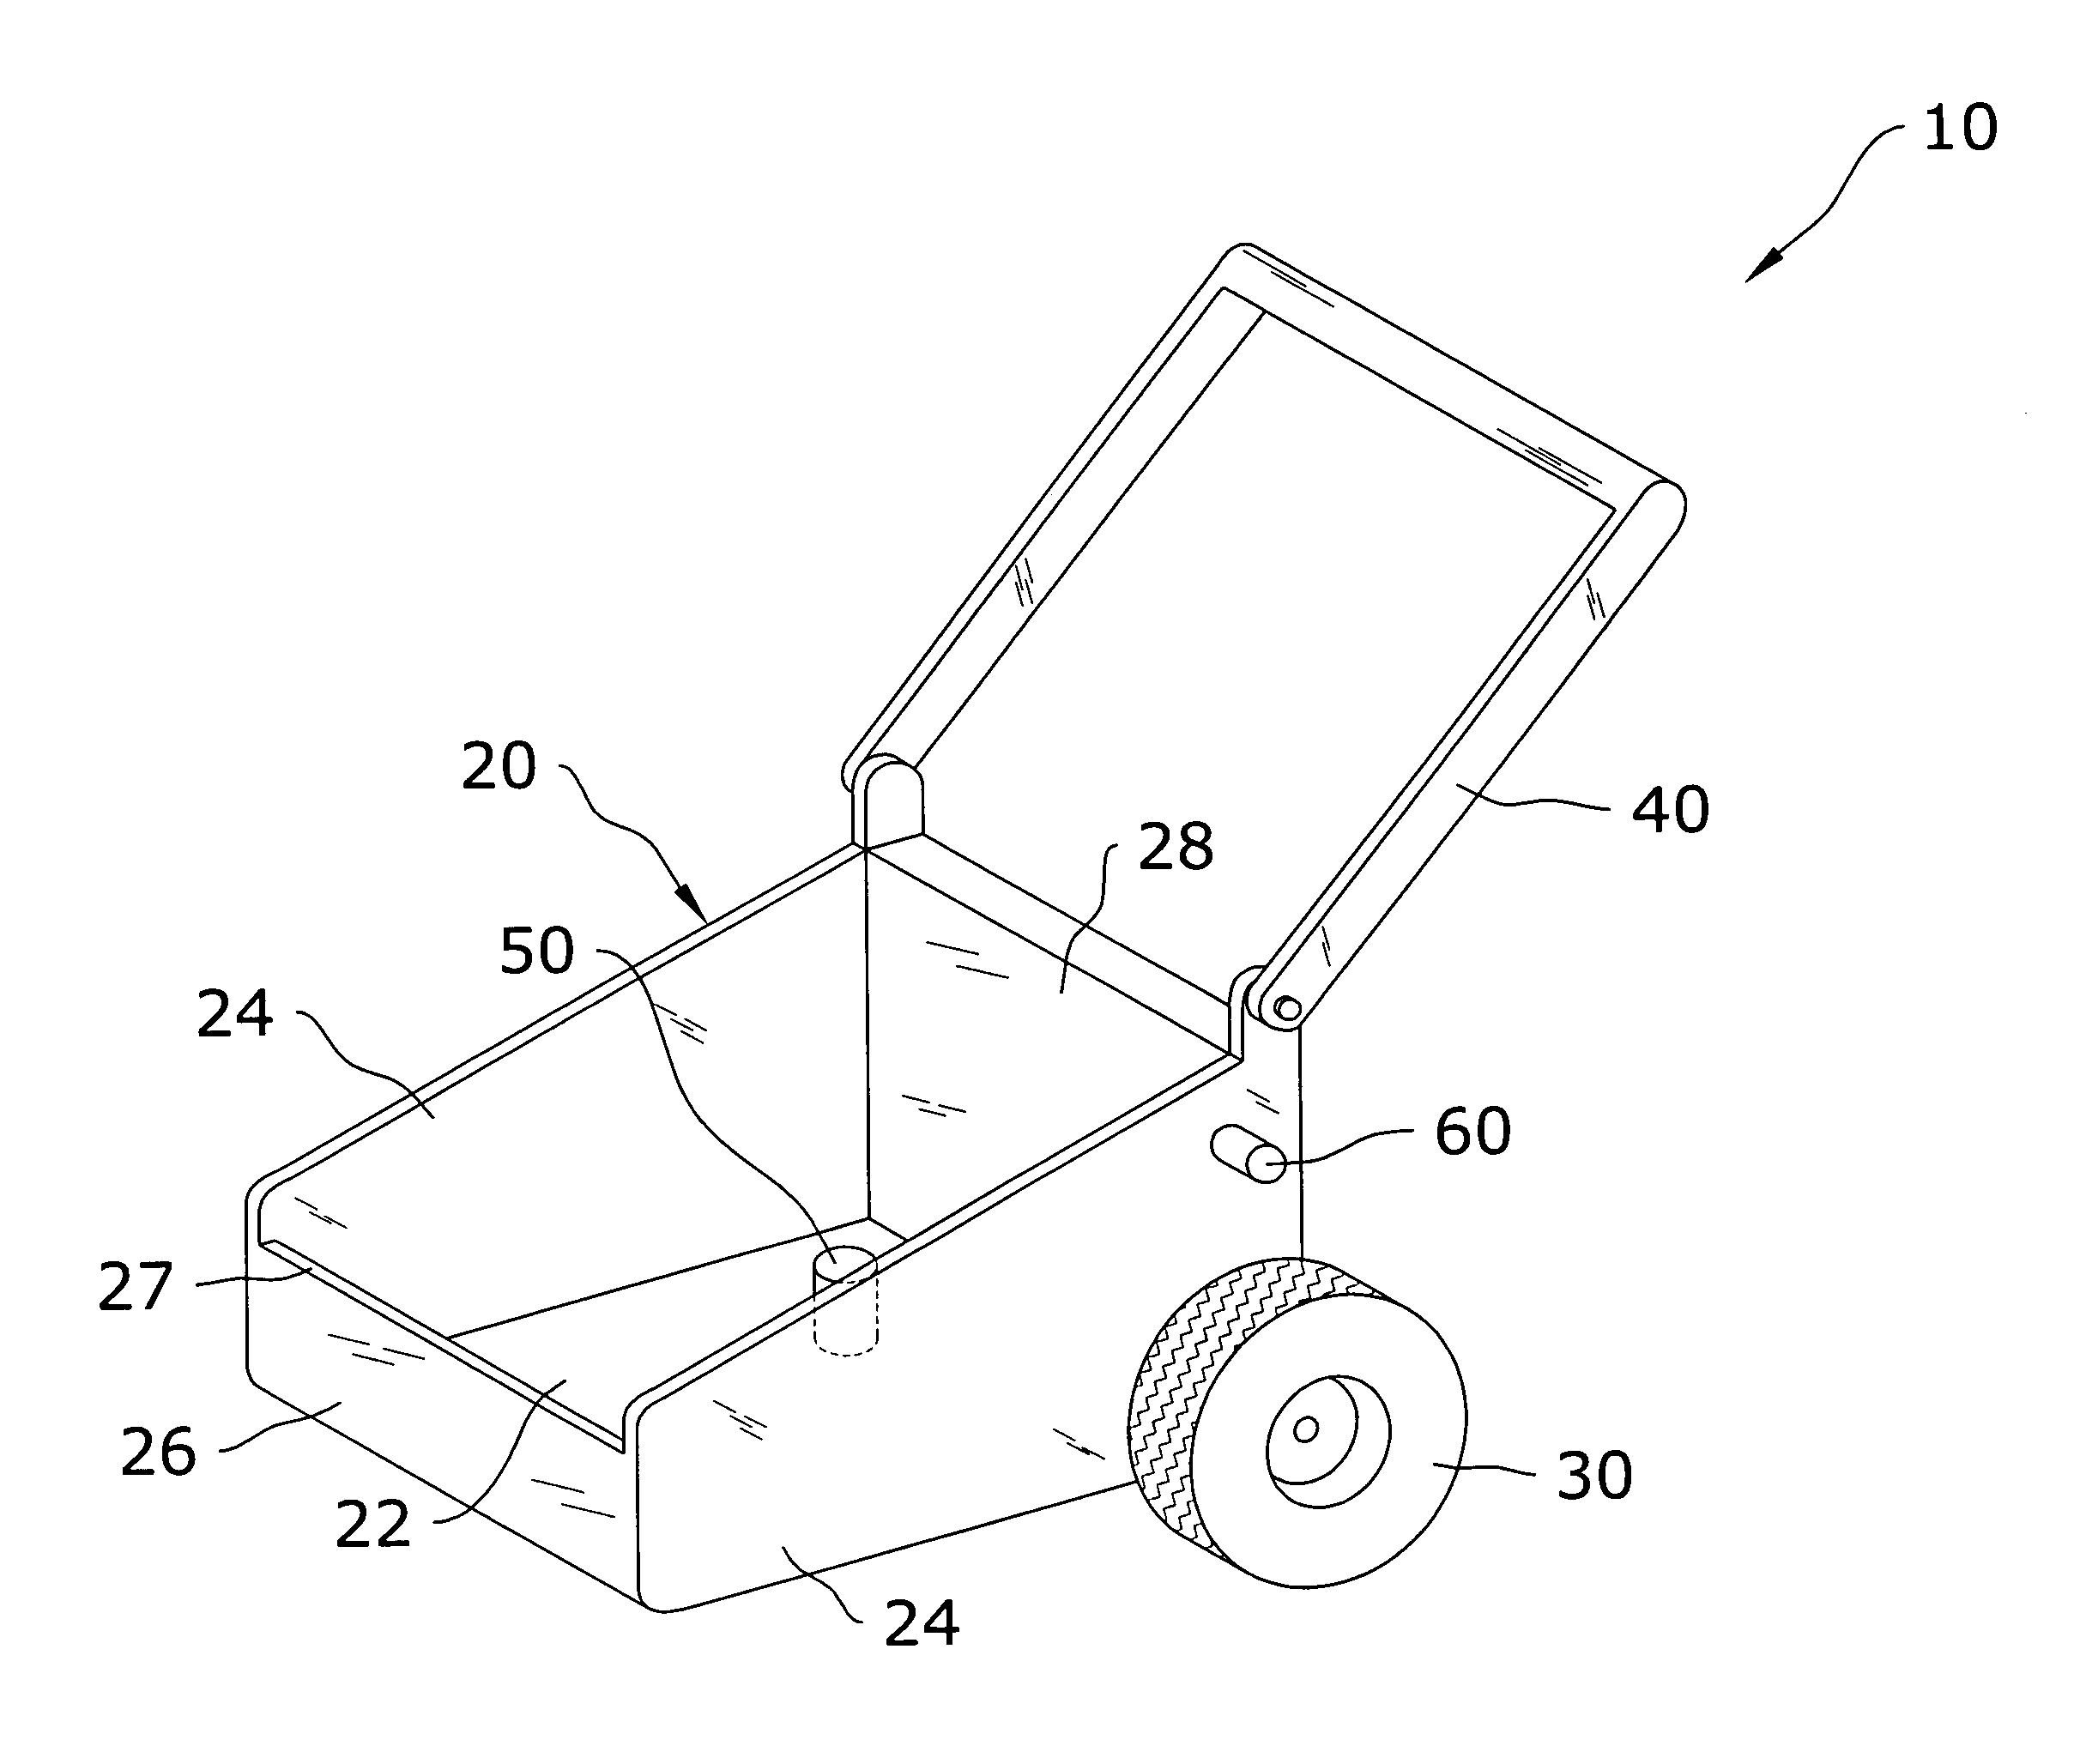 Toilet moving cart system